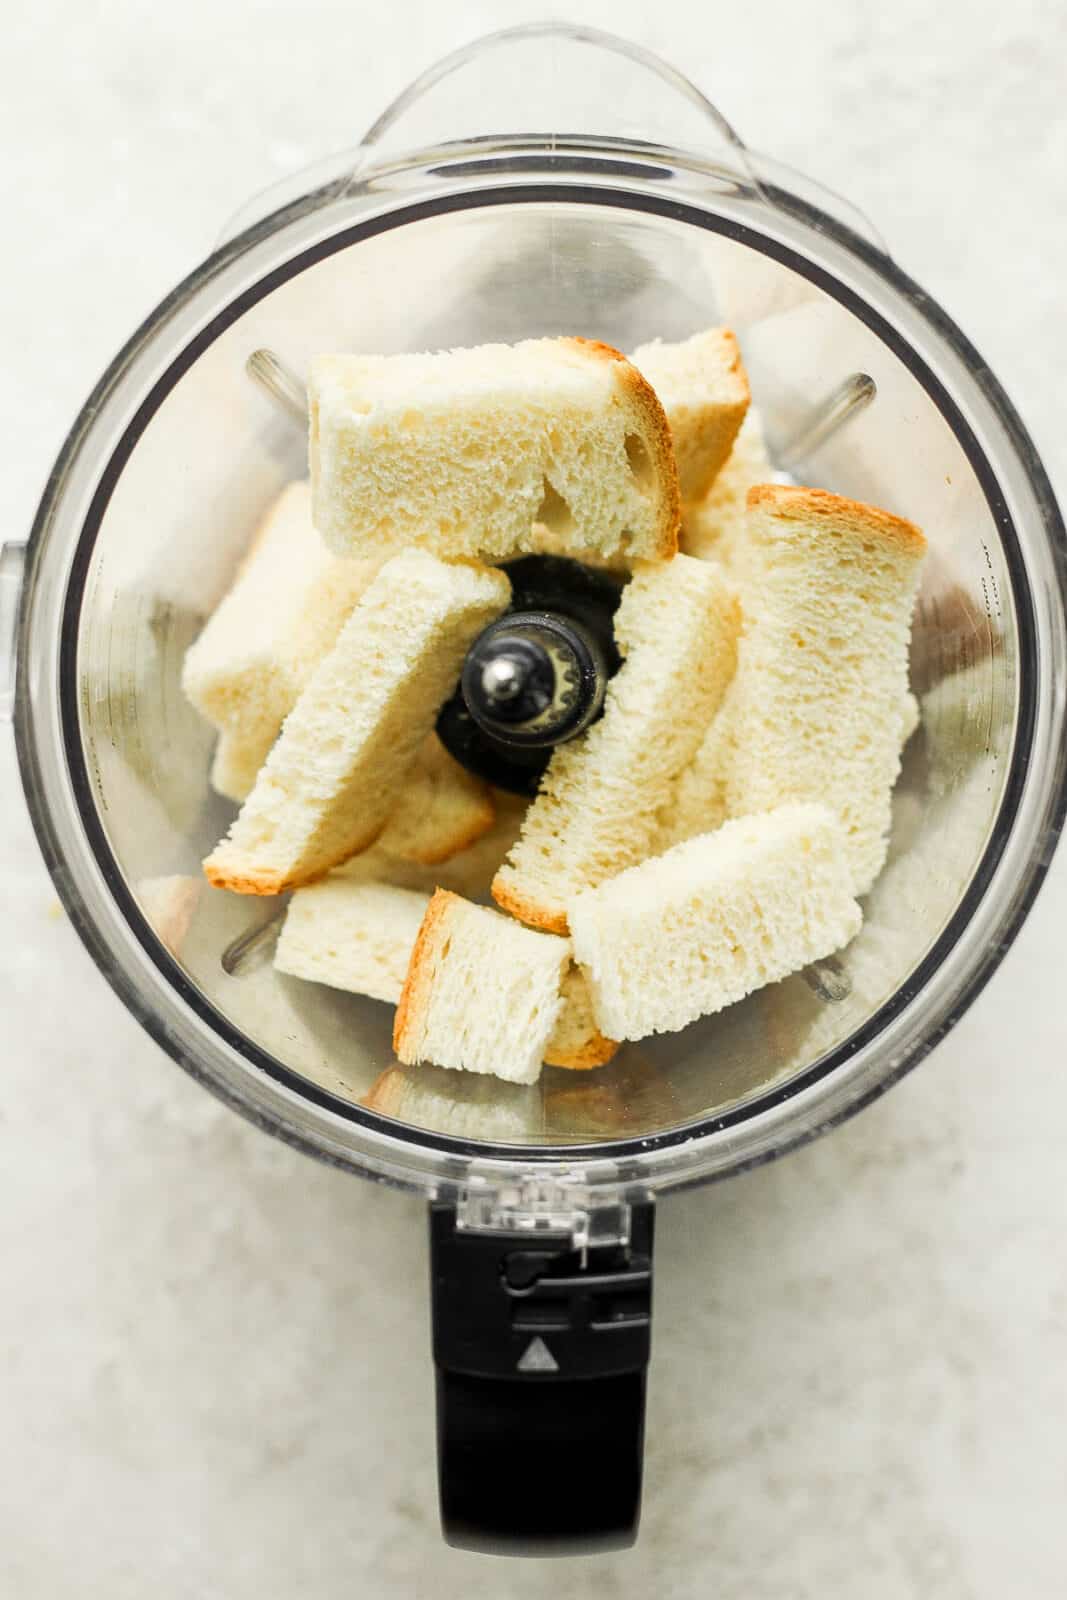 Cubed bread in a food processor. 